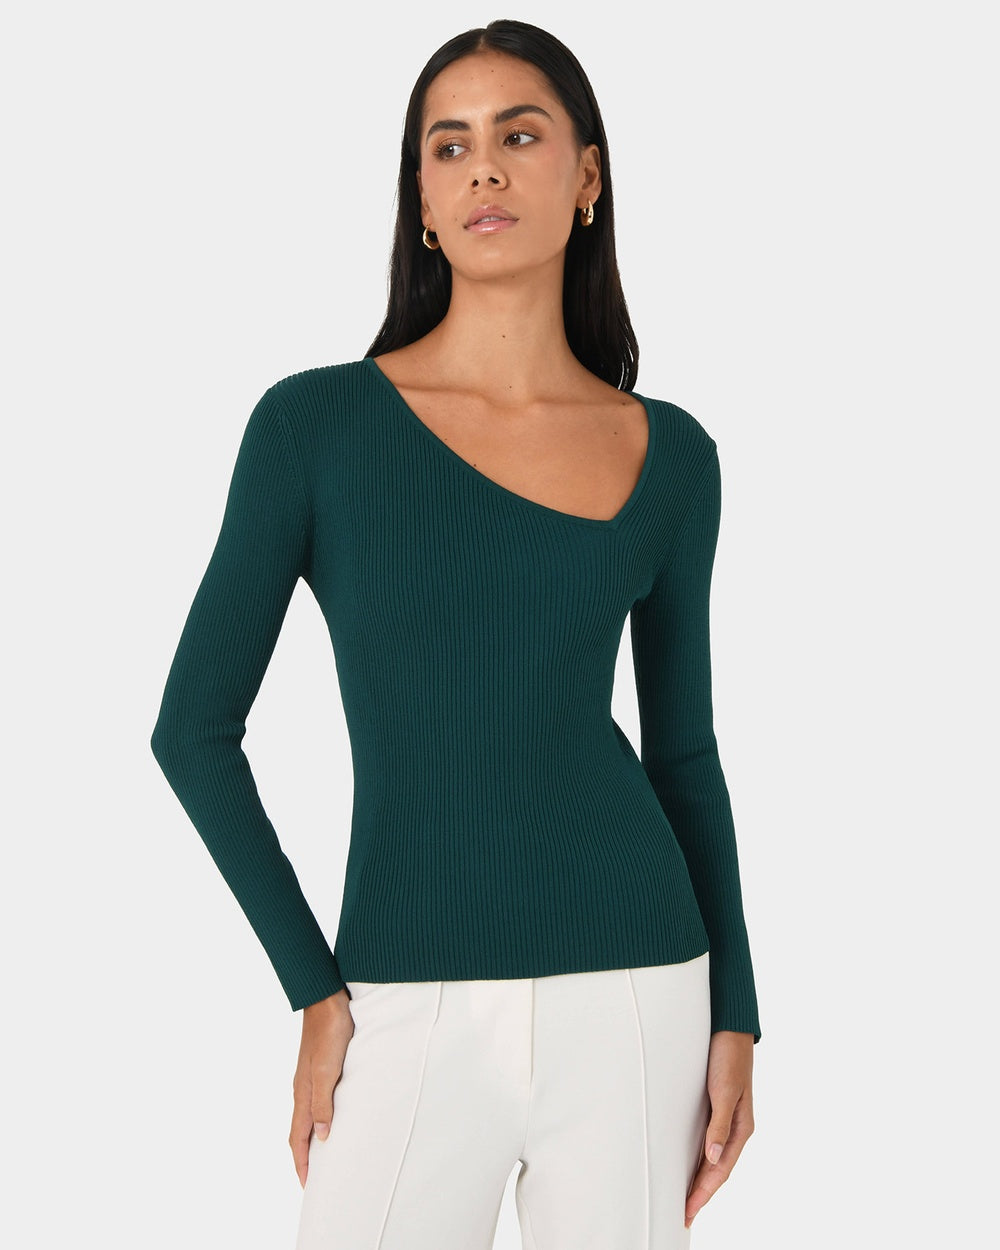 Asymmetric Knit Top - pair with jeans or a denim skirt